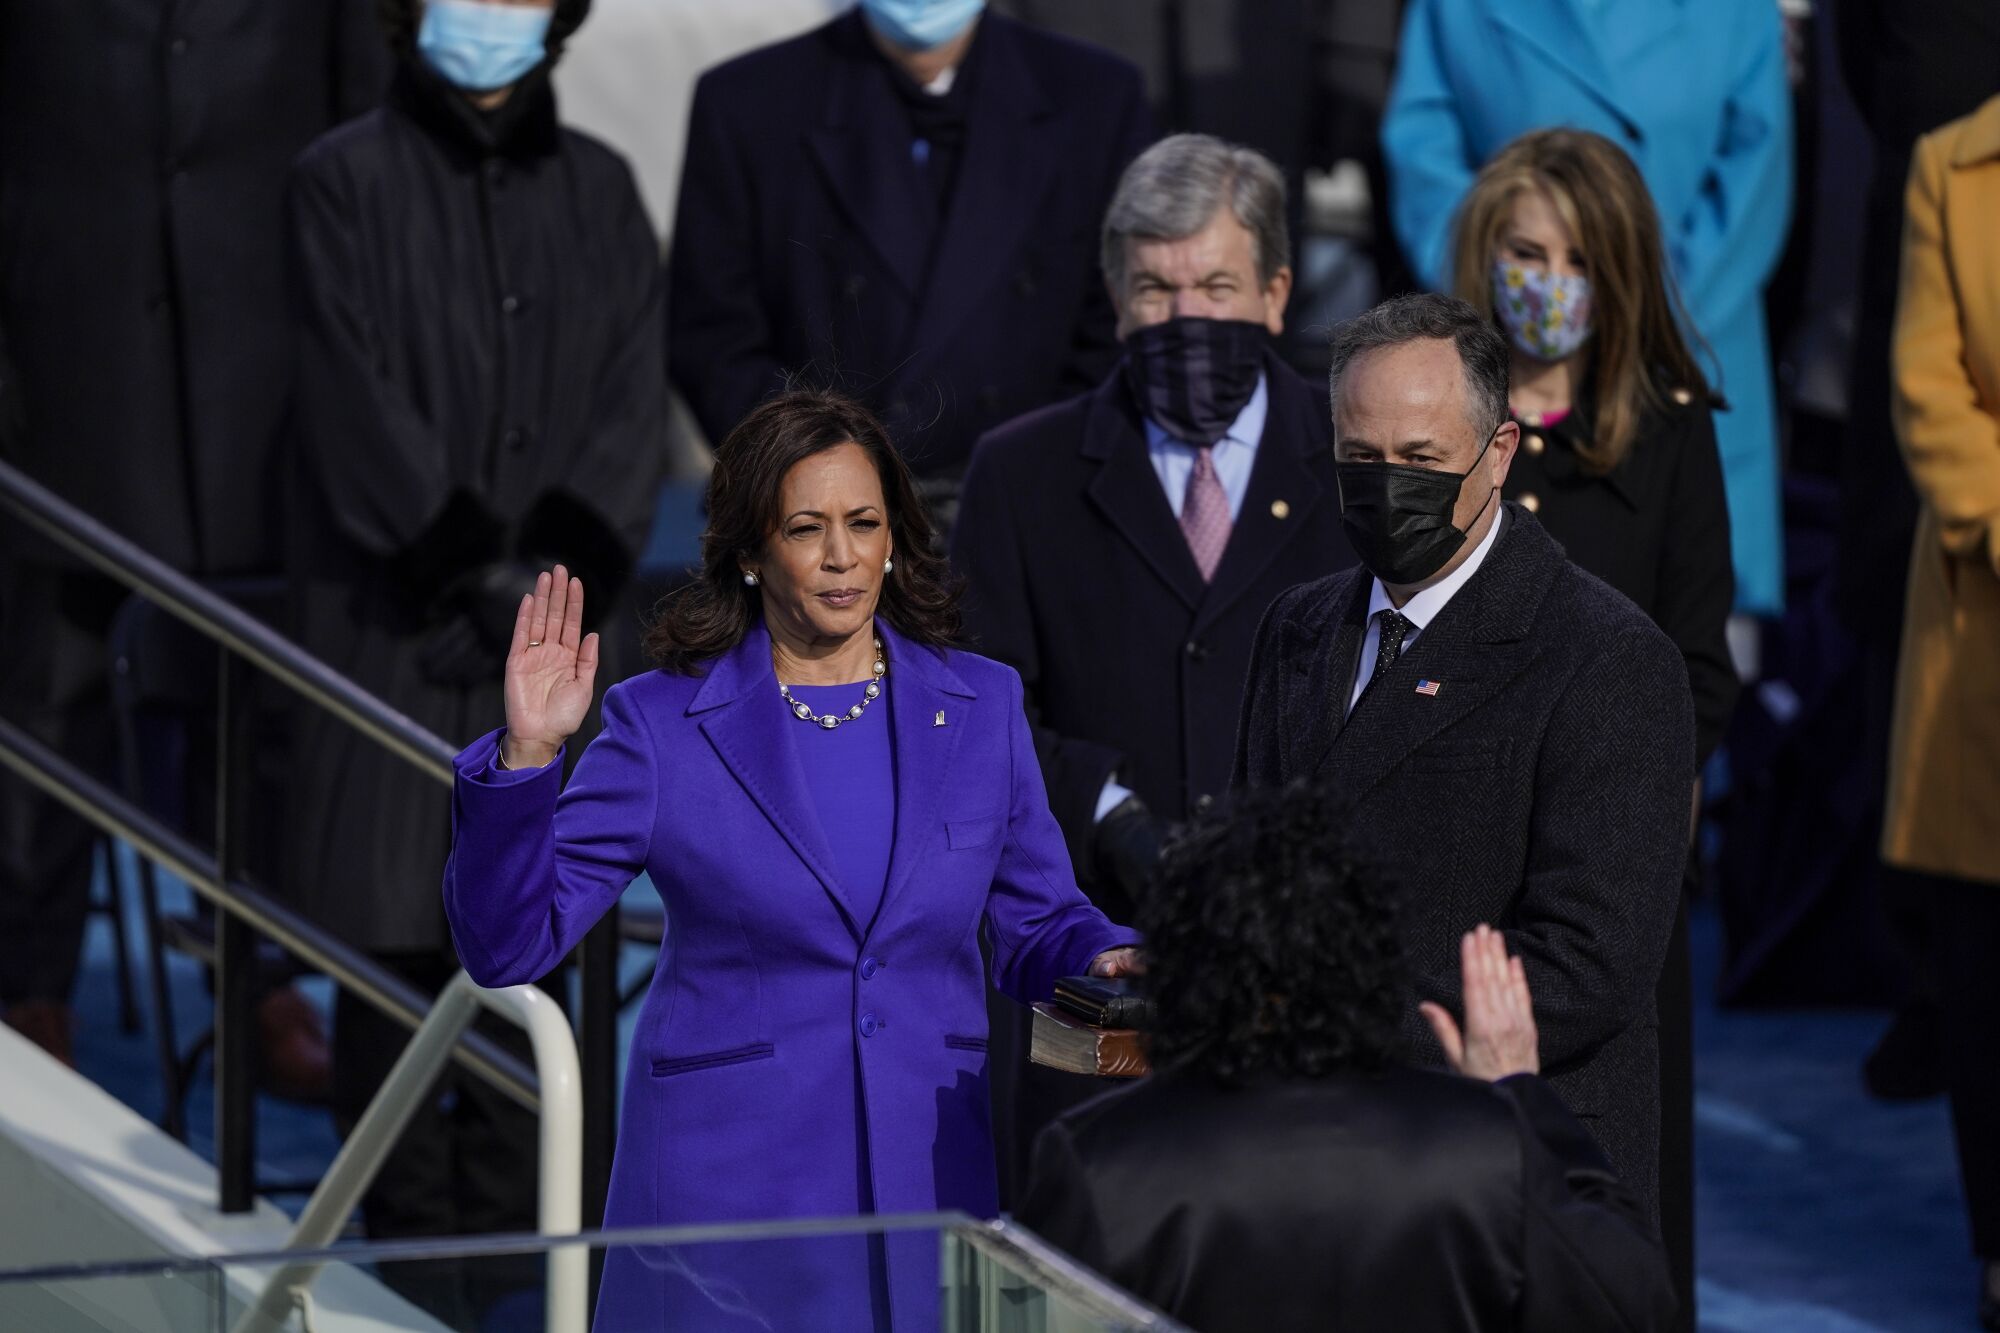 Kamala Harris is sworn in as vice president of the United States.